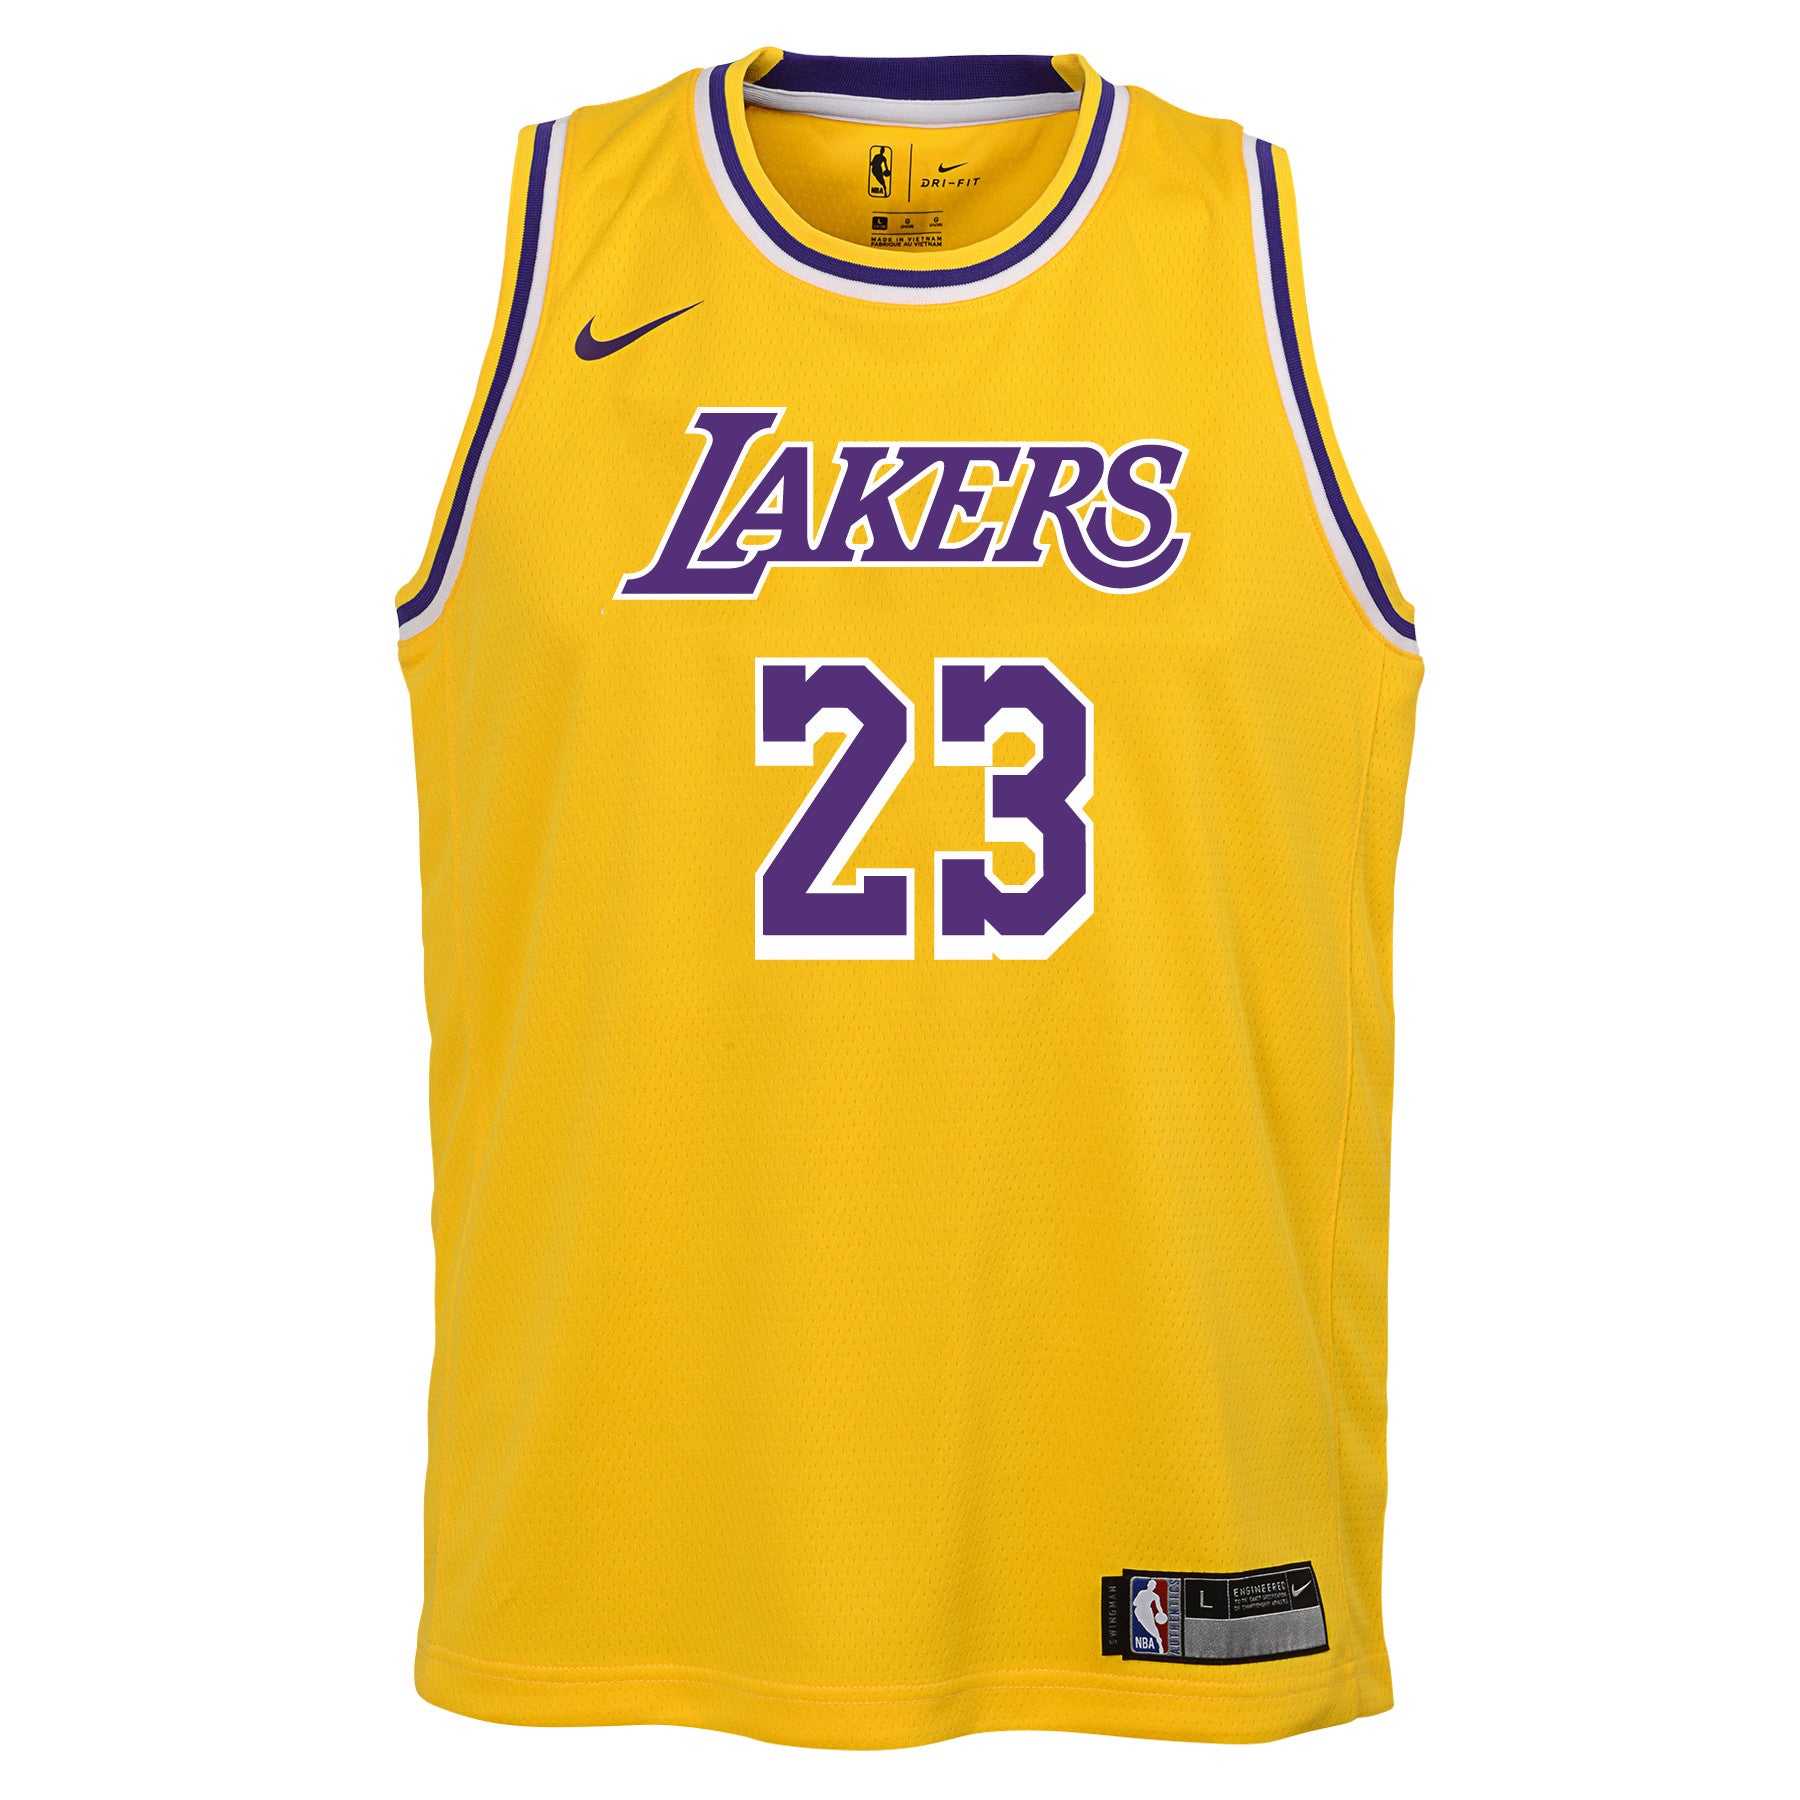 mpls lakers jersey for sale